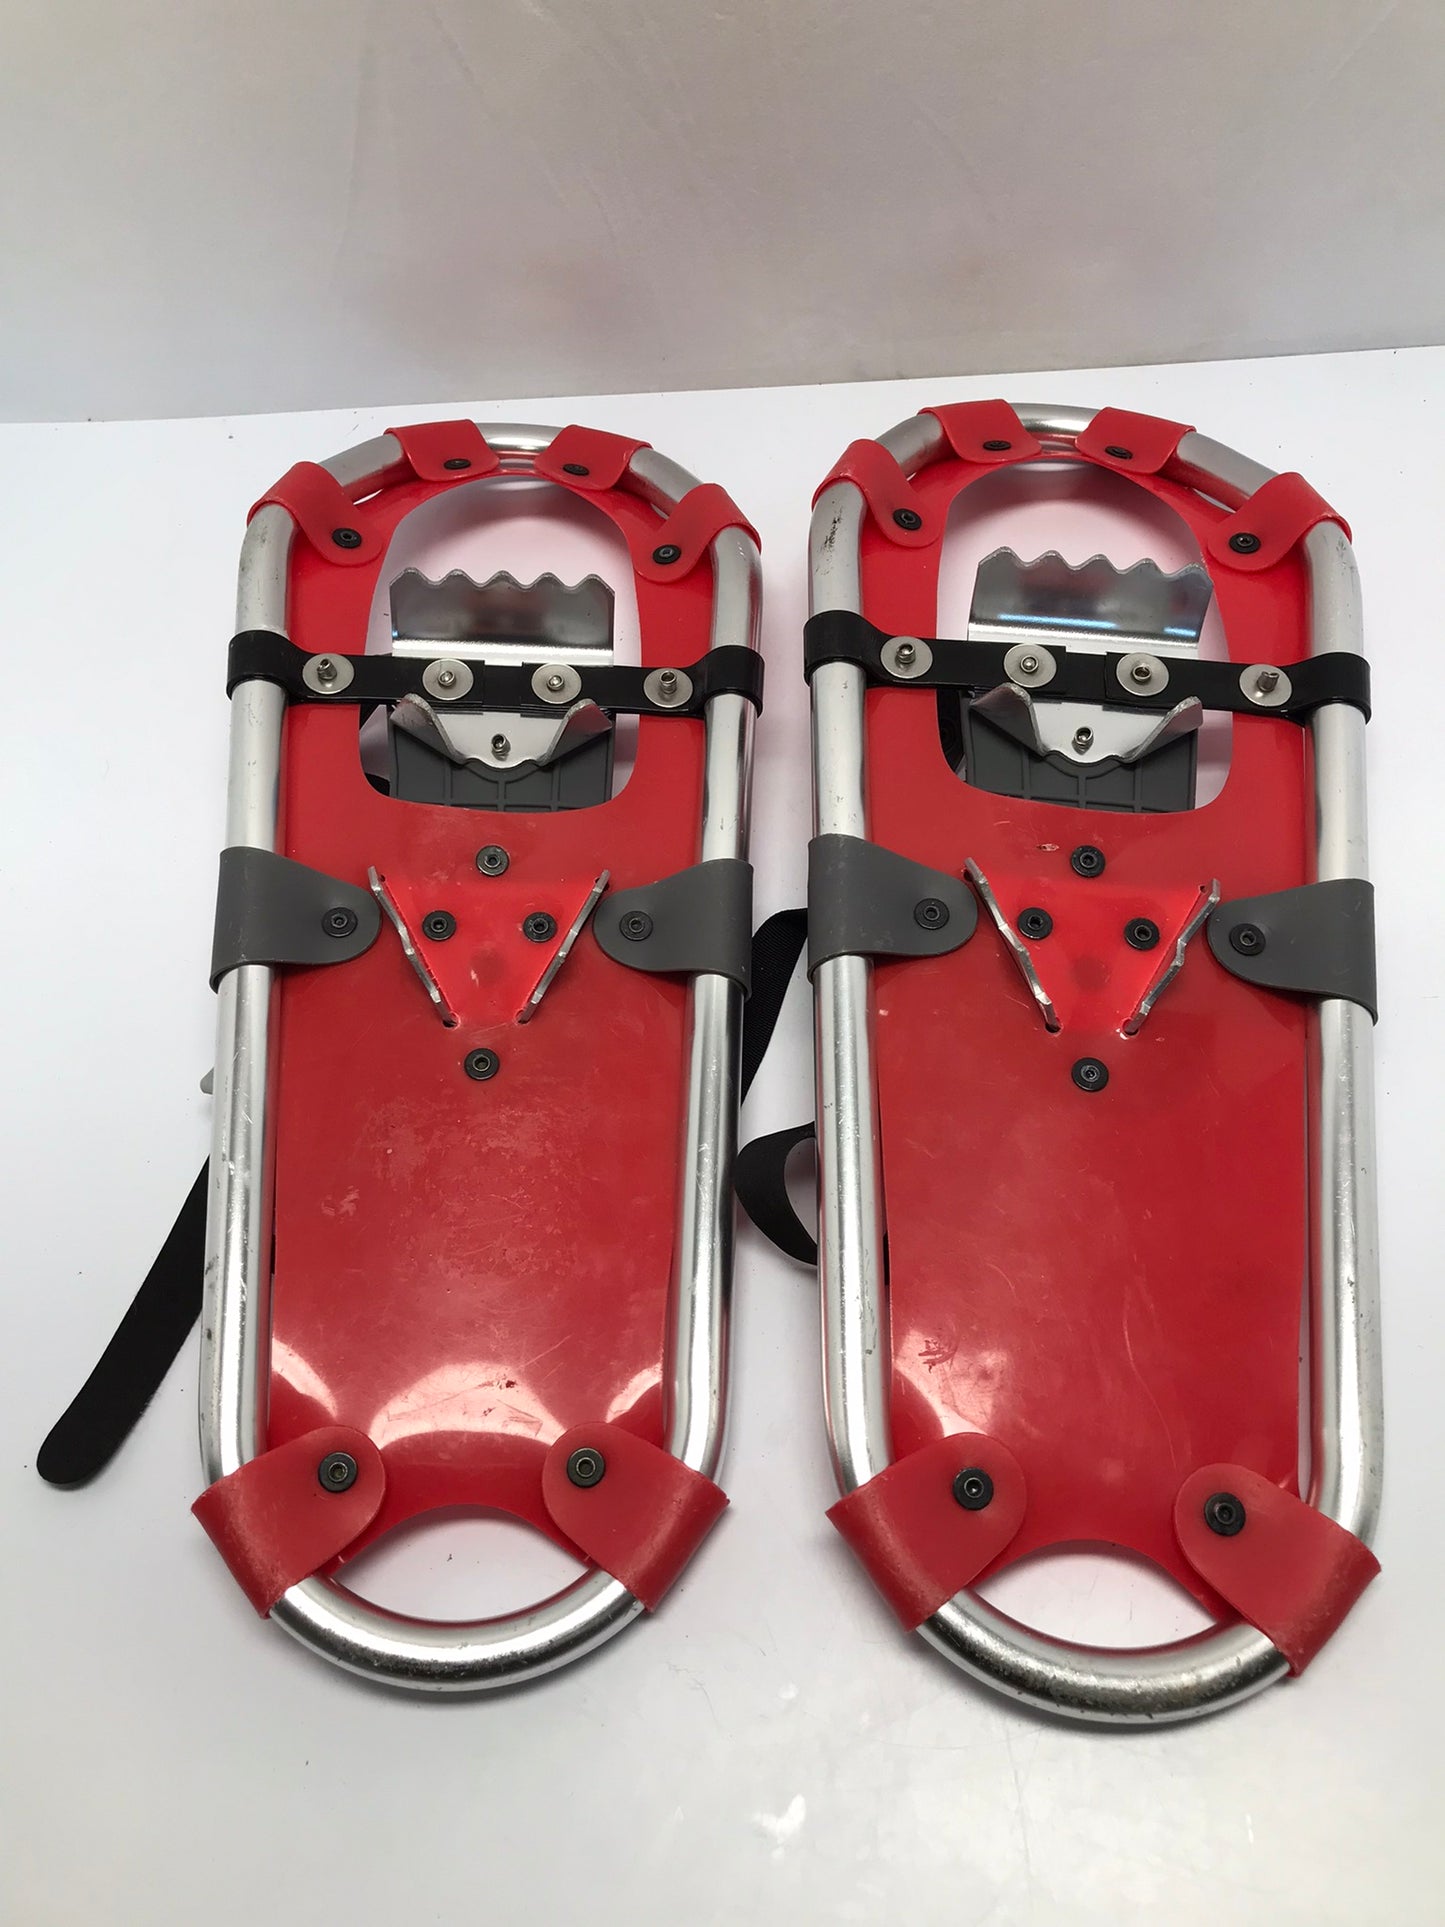 Snowshoes Child Size 19 inch Up To 95 Pounds Tubbs Red Fantastic Quality